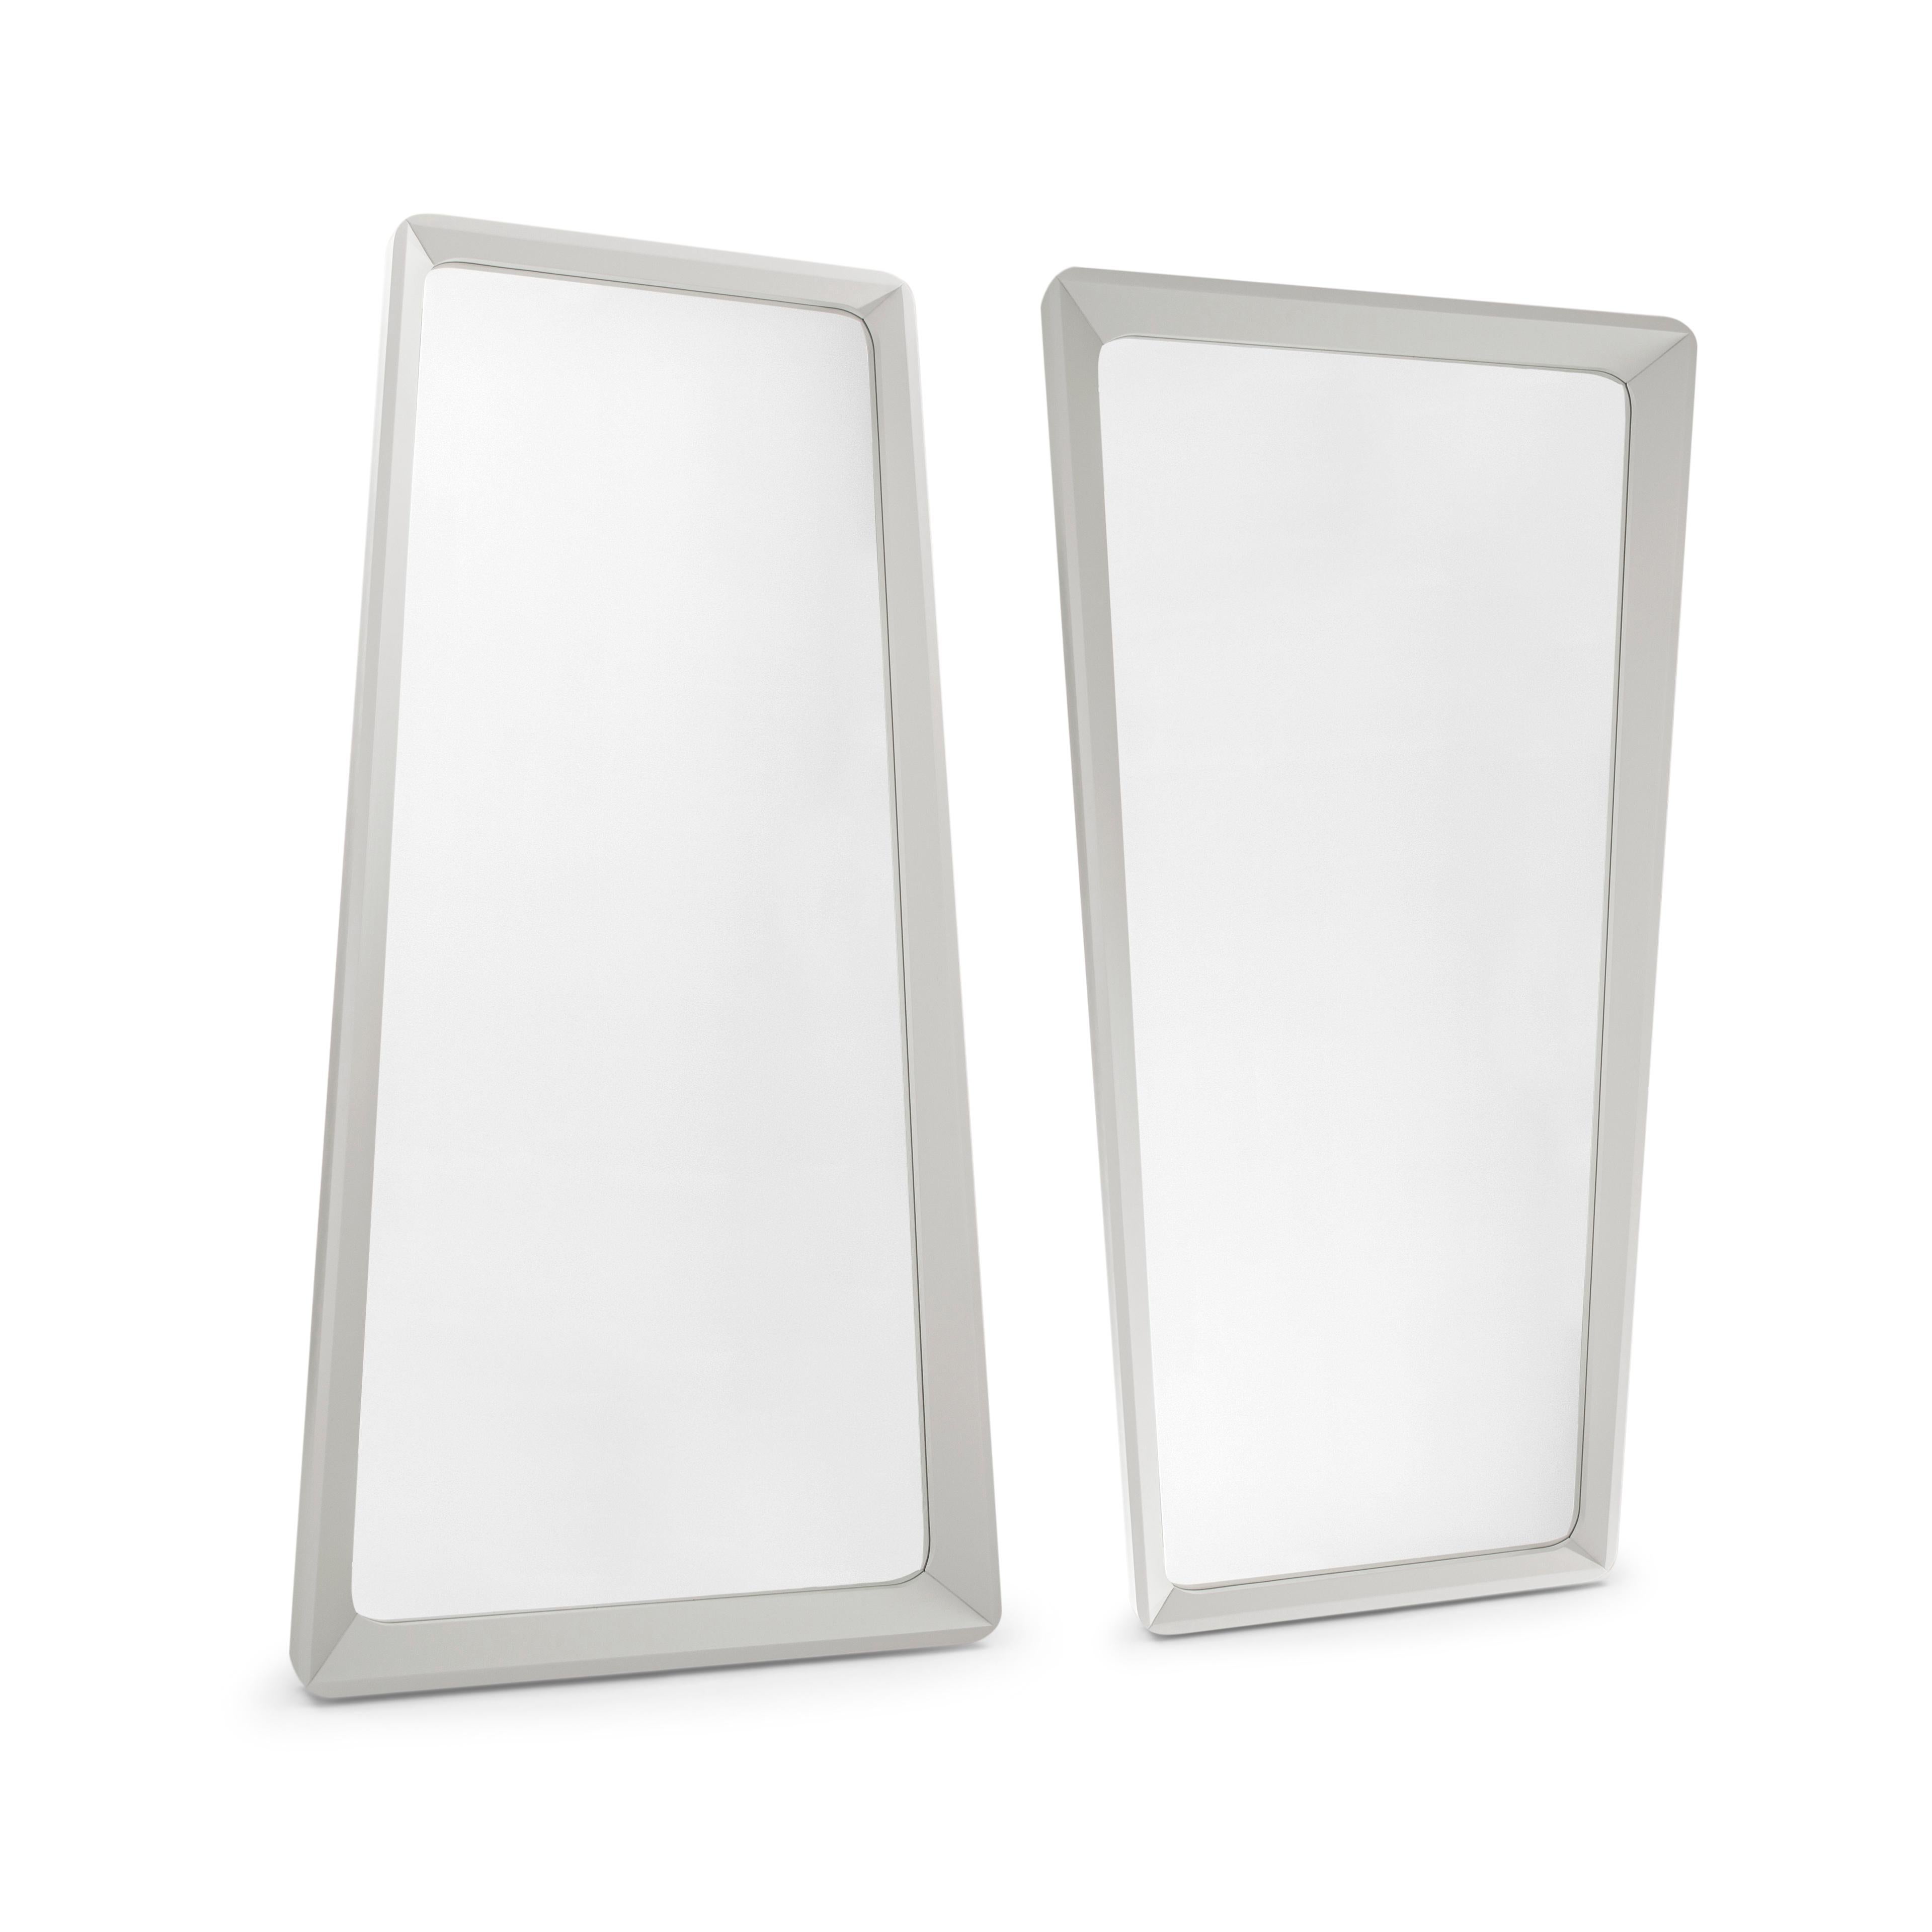 The Duomo full length mirror adds refinement and elegance to any environment. The off-white solid wood finish frame with soft corners gives the Duomo its own identity. This mirror was designed by our amazing Uultis Design team in order to use this